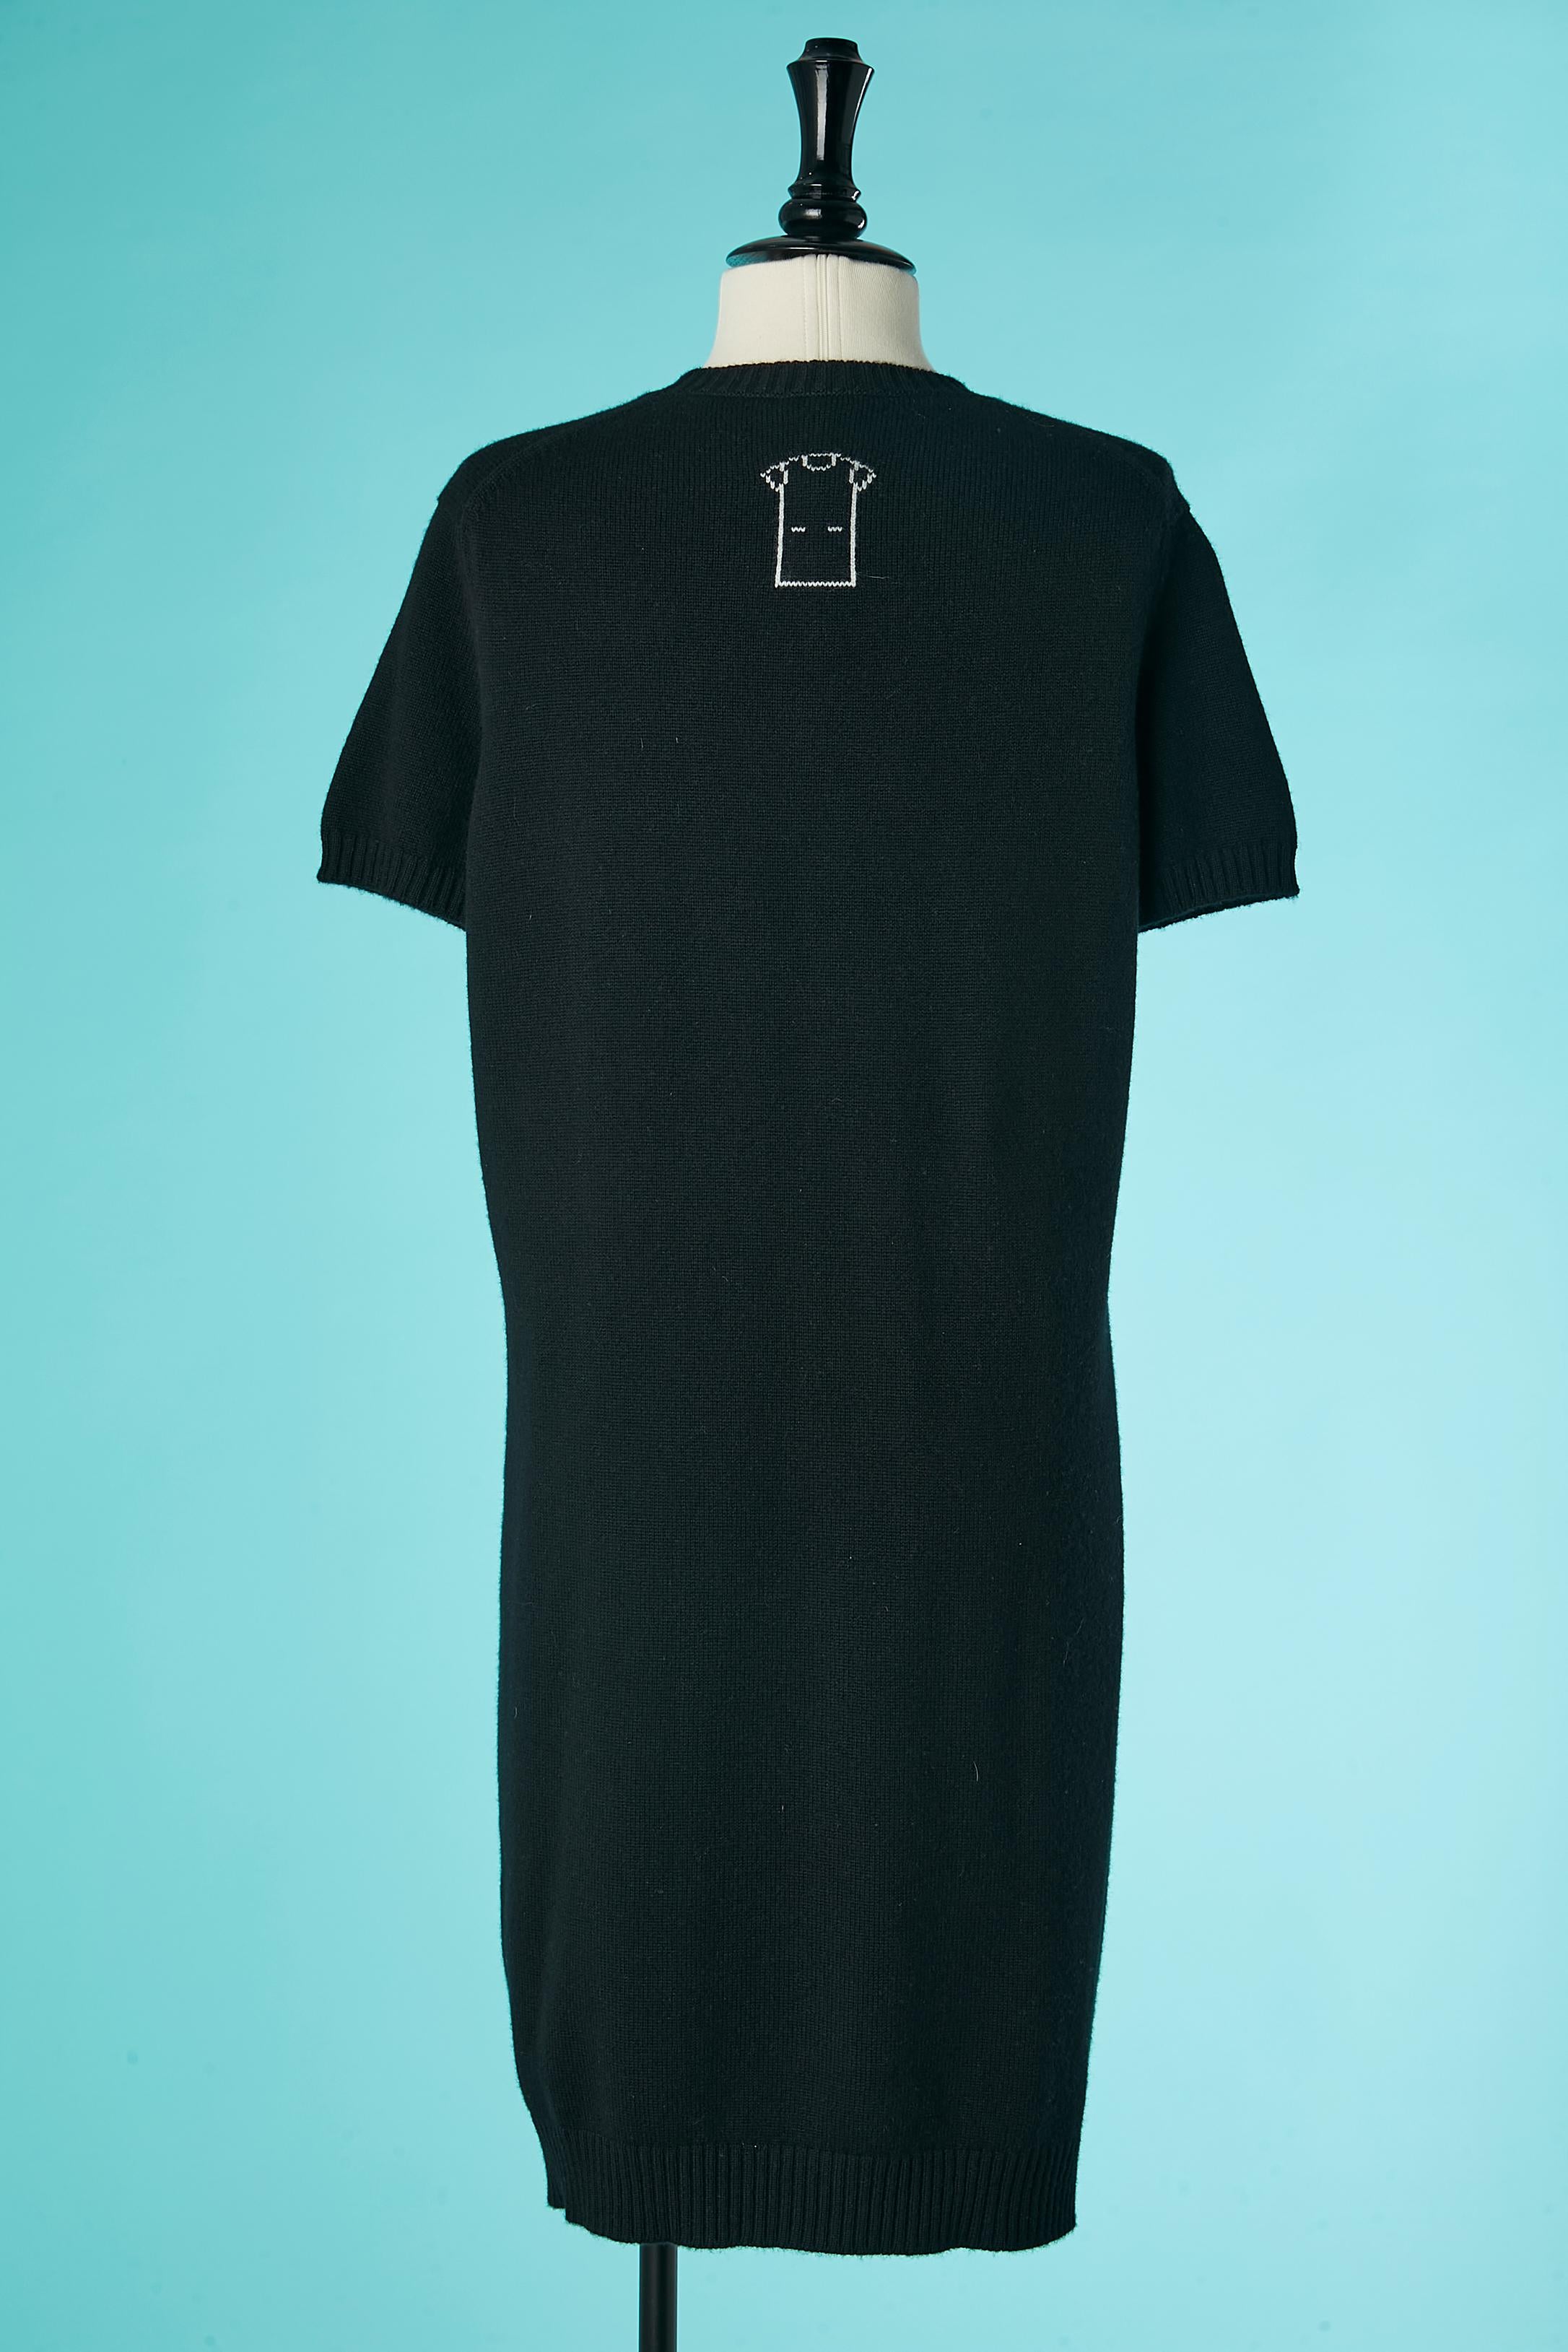 Black cashmere knit dress with short sleeve and embellishment Chanel  For Sale 1